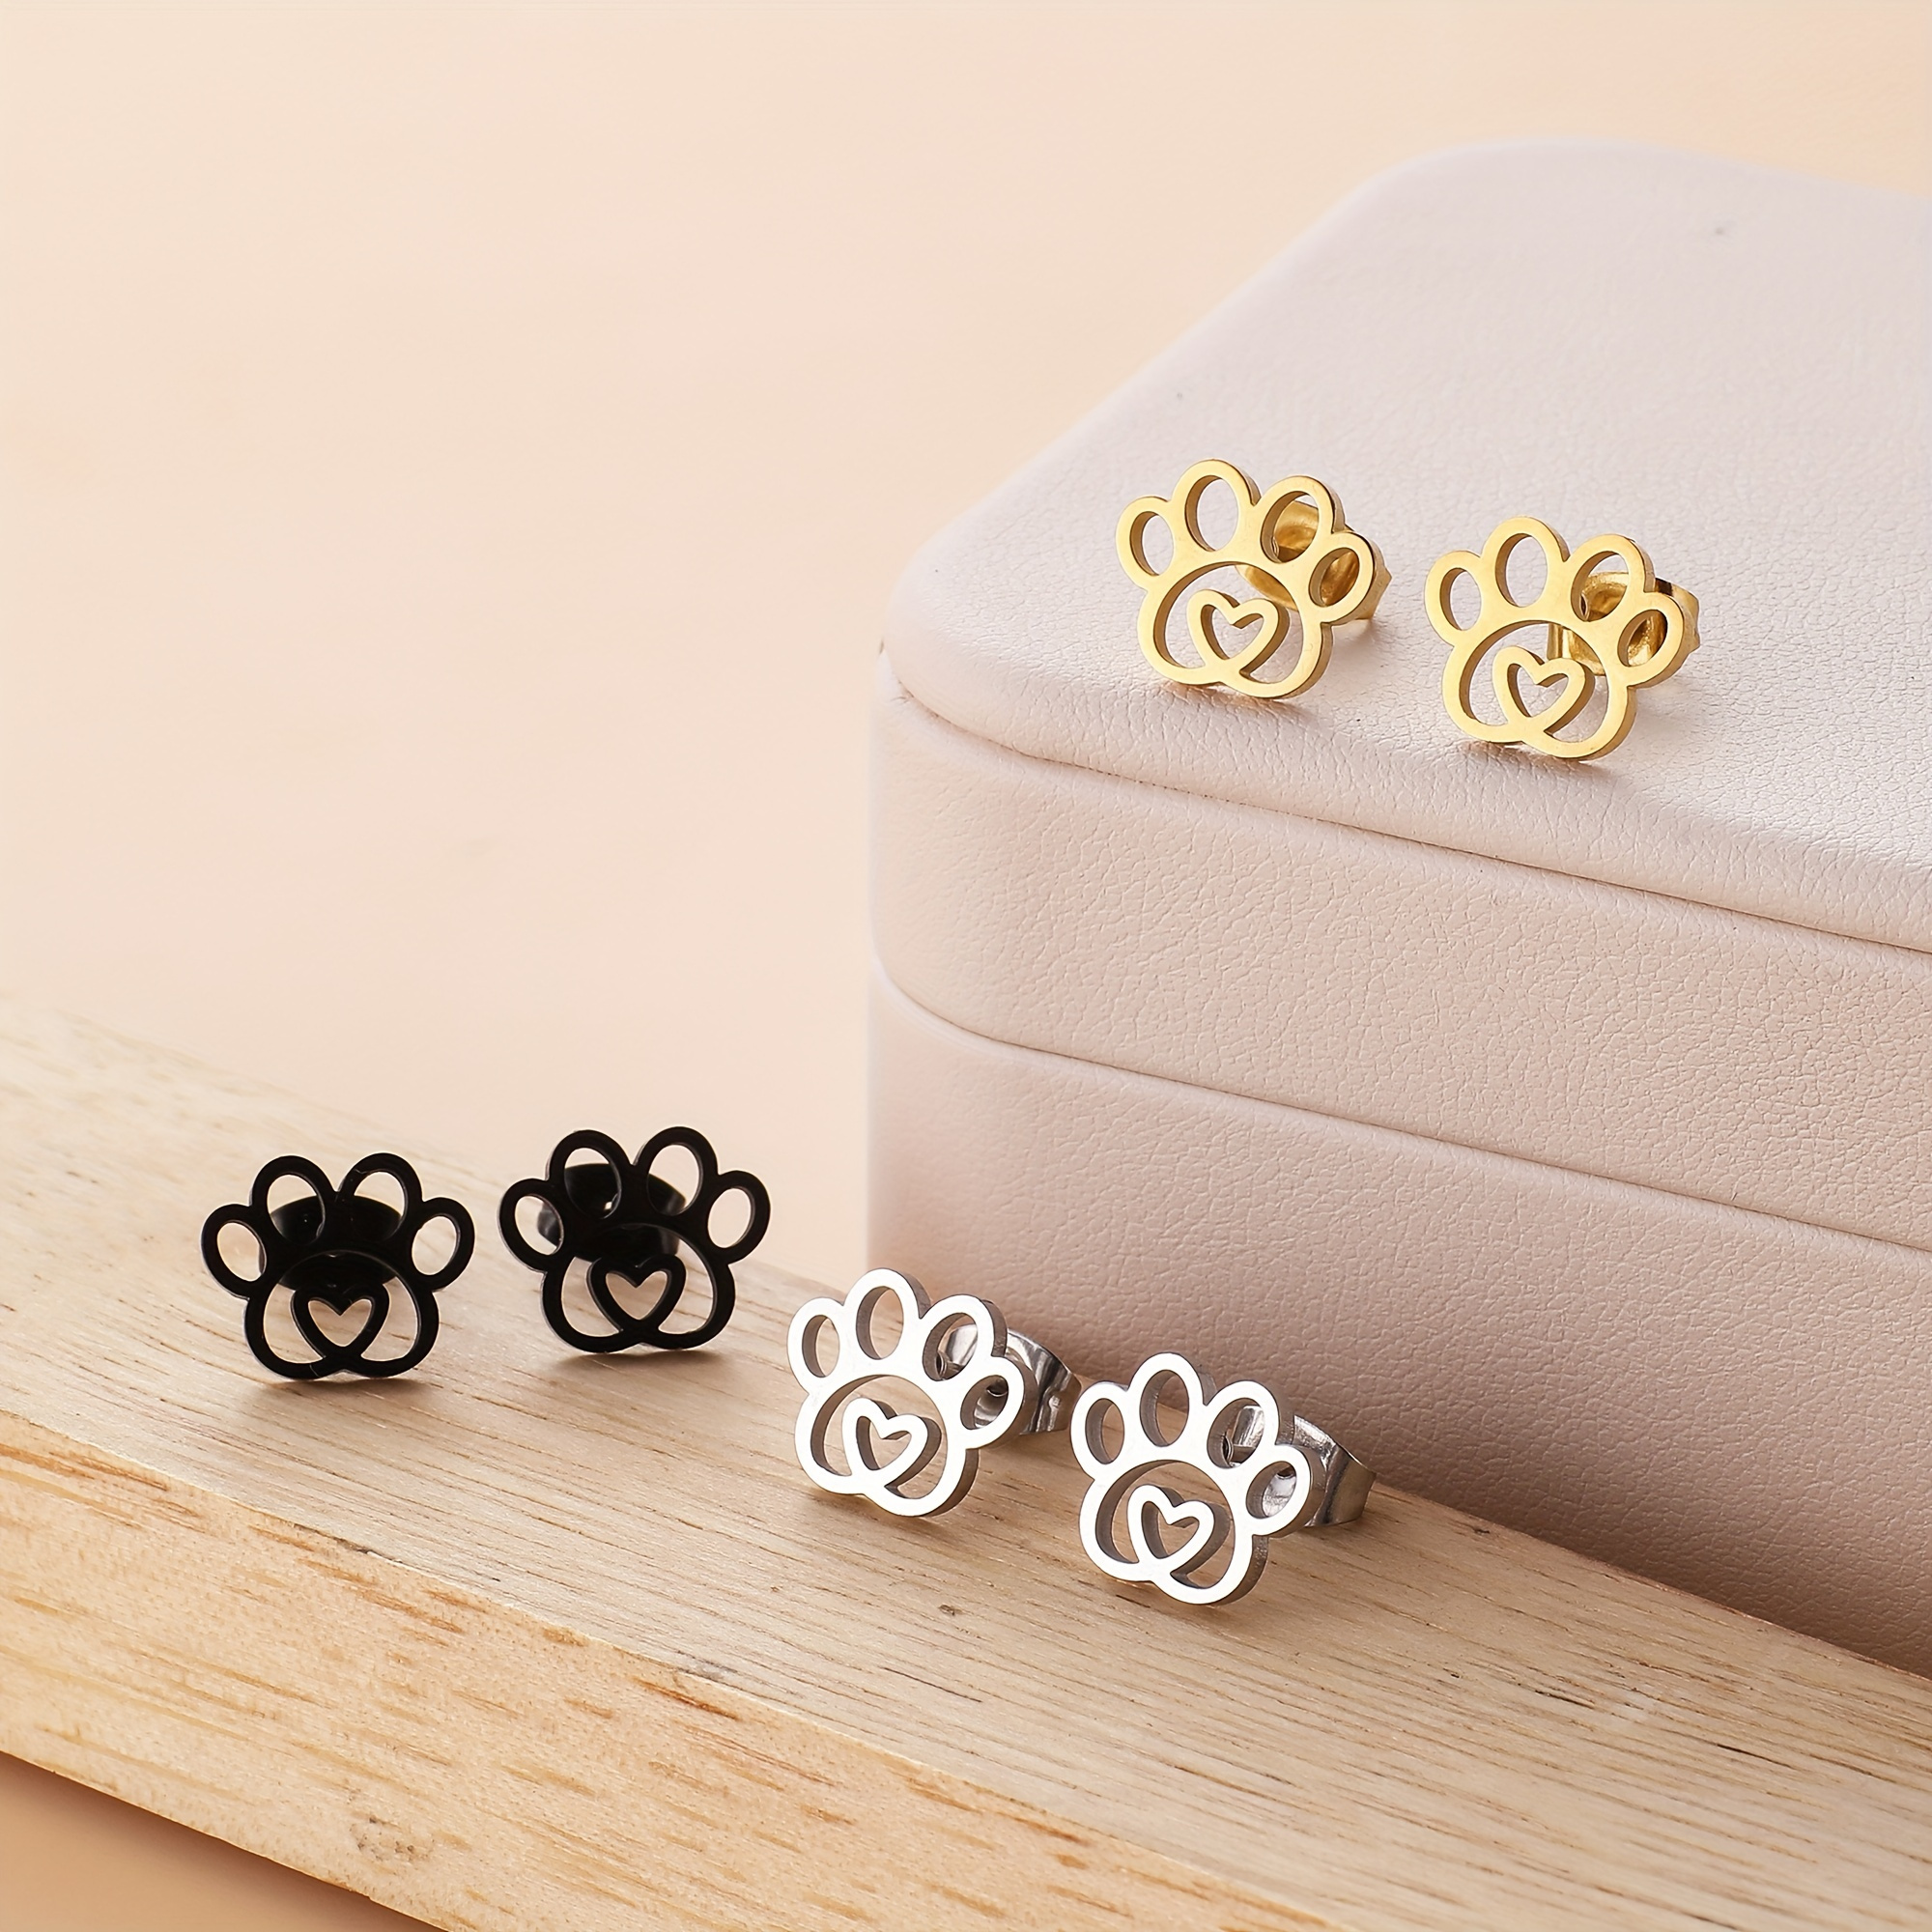 

3 Pairs Set Of Tiny Adorable Hollow Pets Claw Shaped Stud Earrings Simple Leisure Style Lightweight Female Ear Decor For Daily